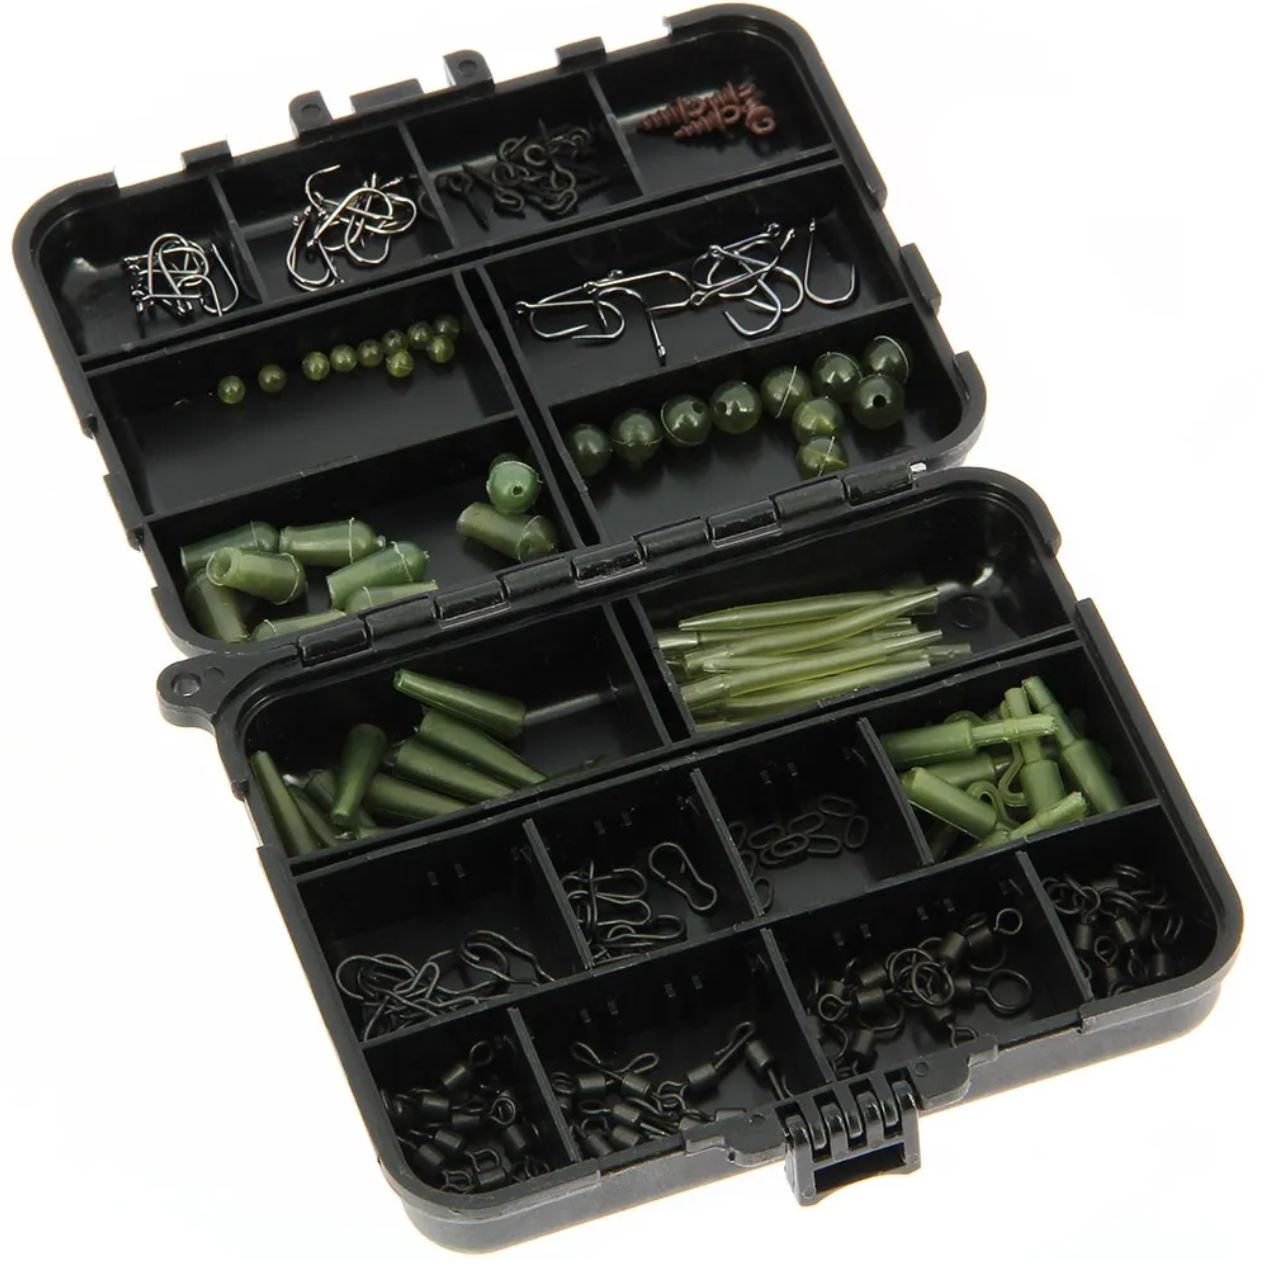 Angling Pursuits Carp 175 Piece Fully Loaded Rig Terminal Tackle Set.